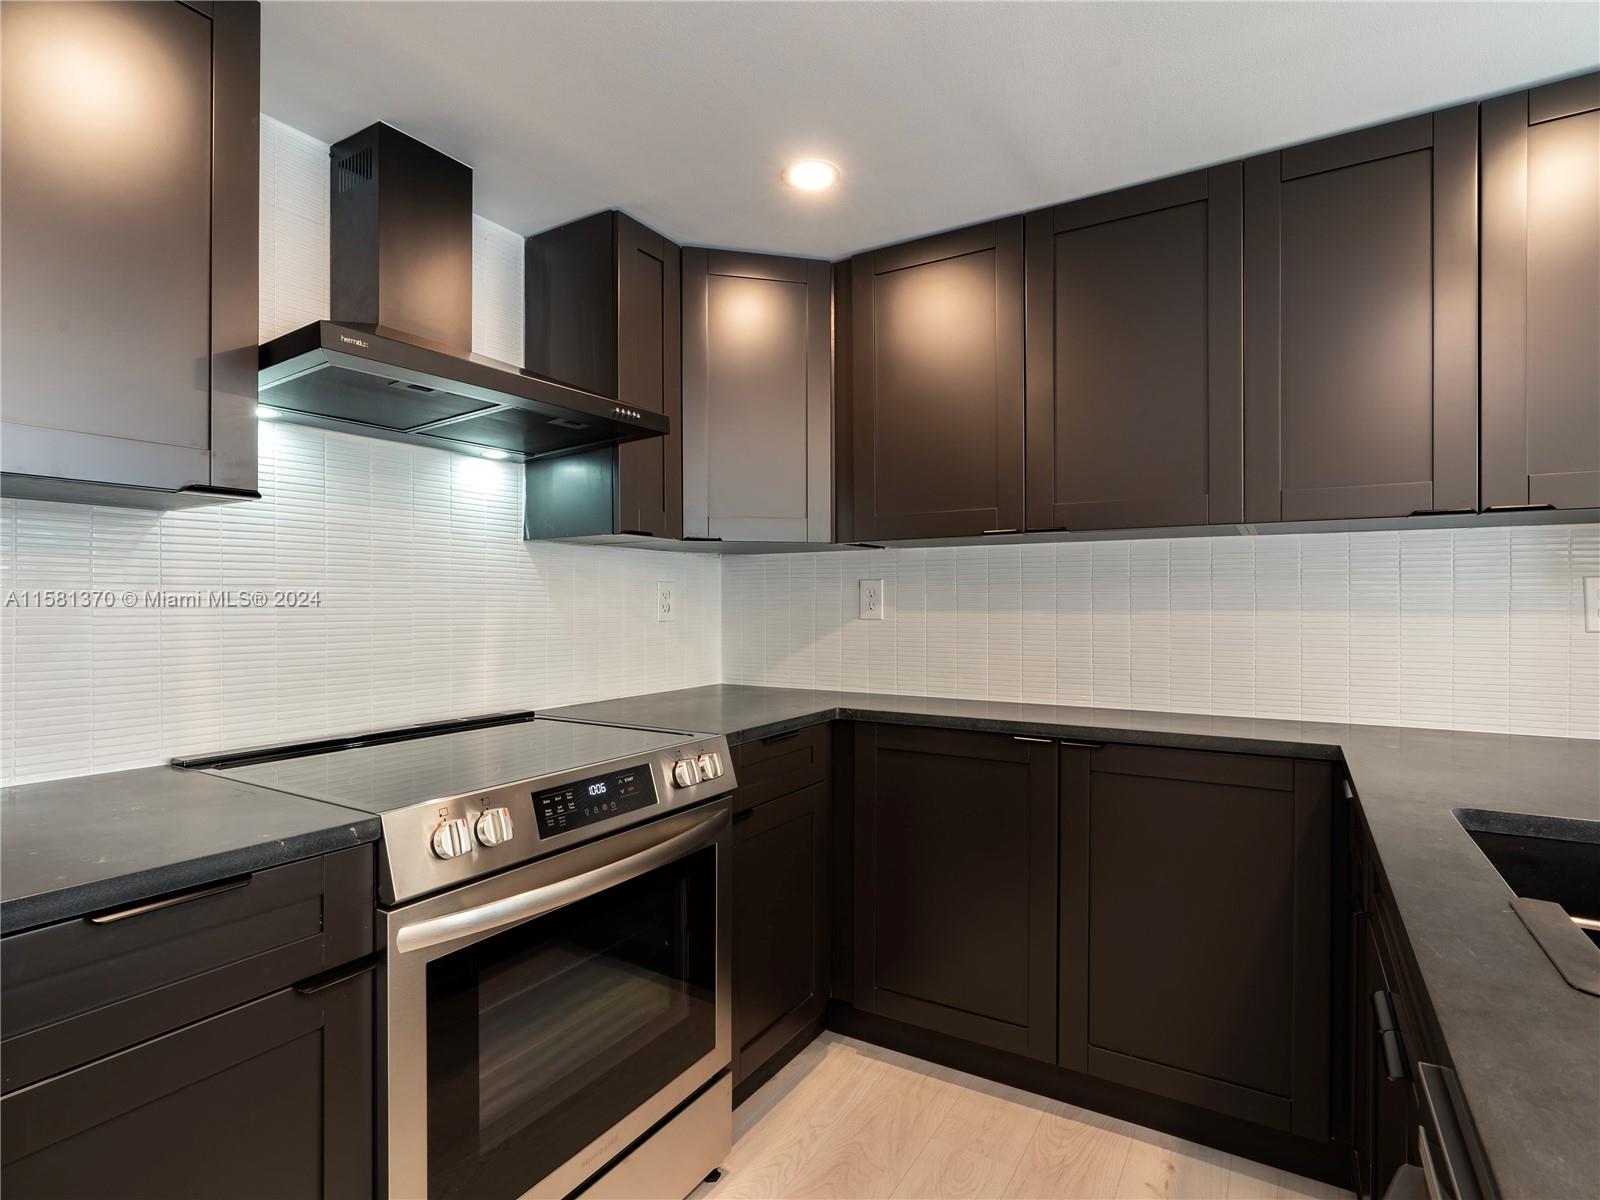 a kitchen with stainless steel appliances wooden cabinets and stove top oven